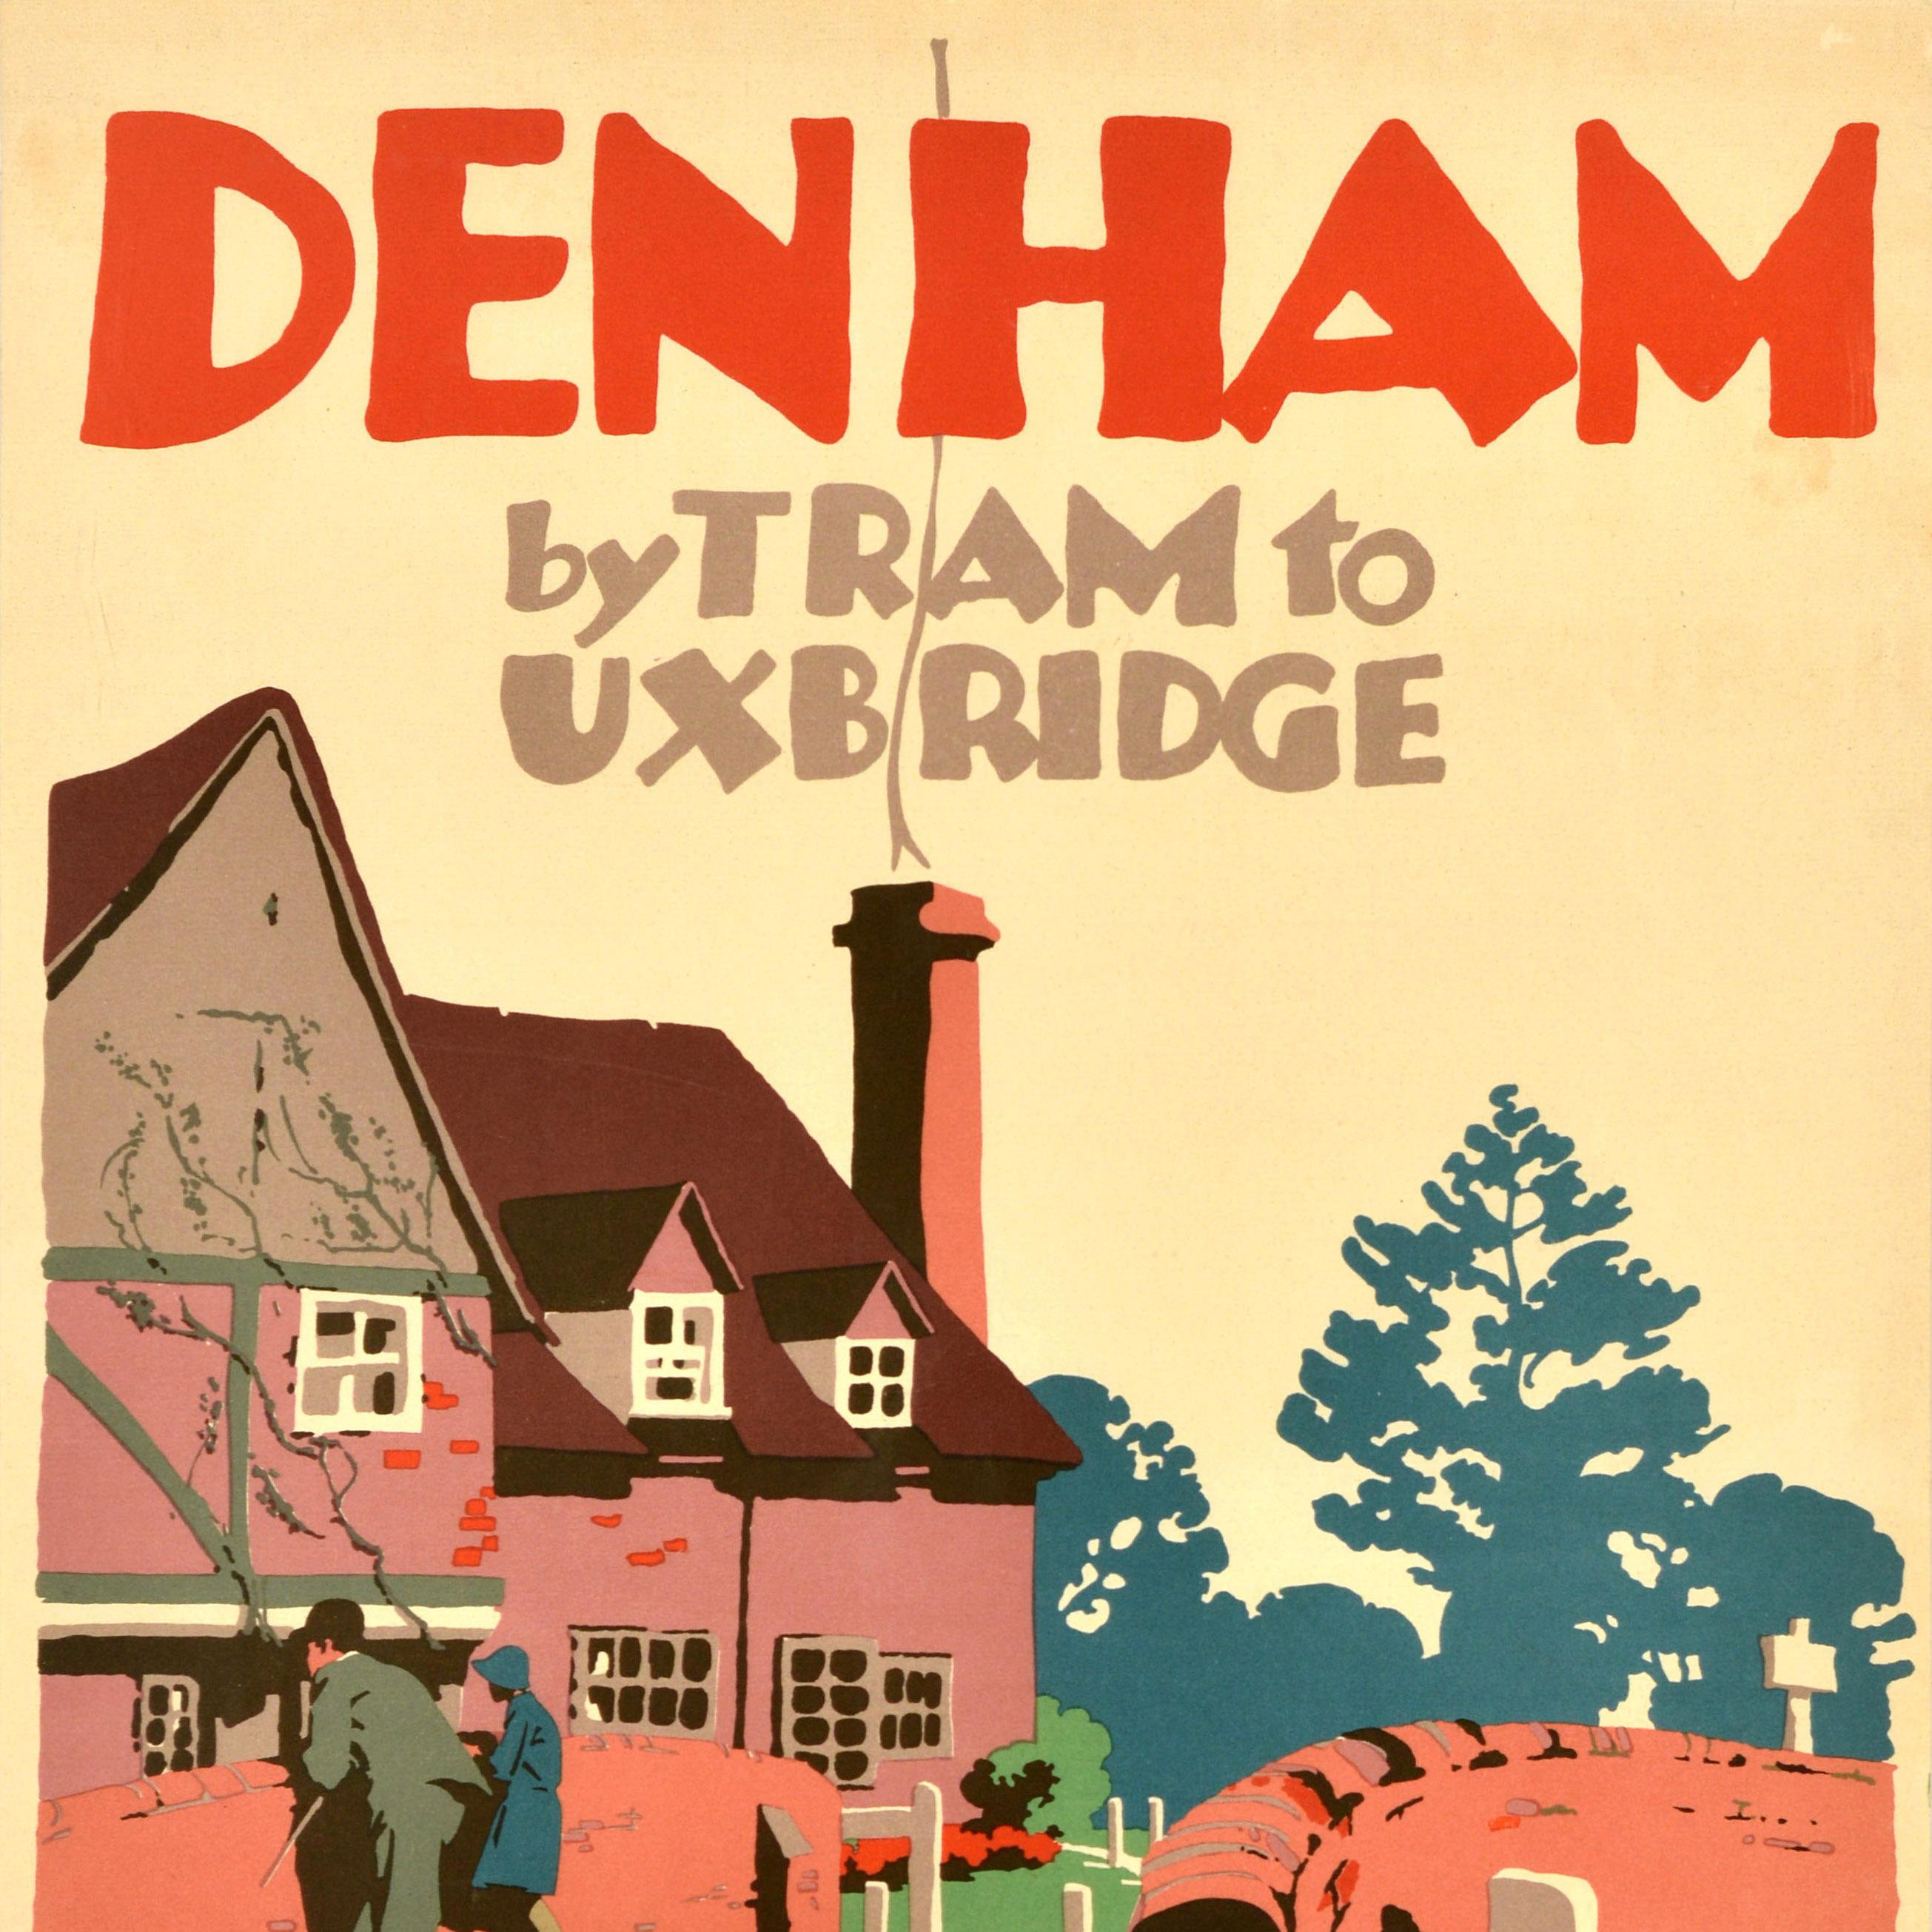 Original vintage travel poster - Denham by Tram to Uxbridge - featuring a colourful image by the notable British poster artist Frank Newbould (1887-1951) depicting a lady and man standing on a stone bridge with a fence in the foreground and a house